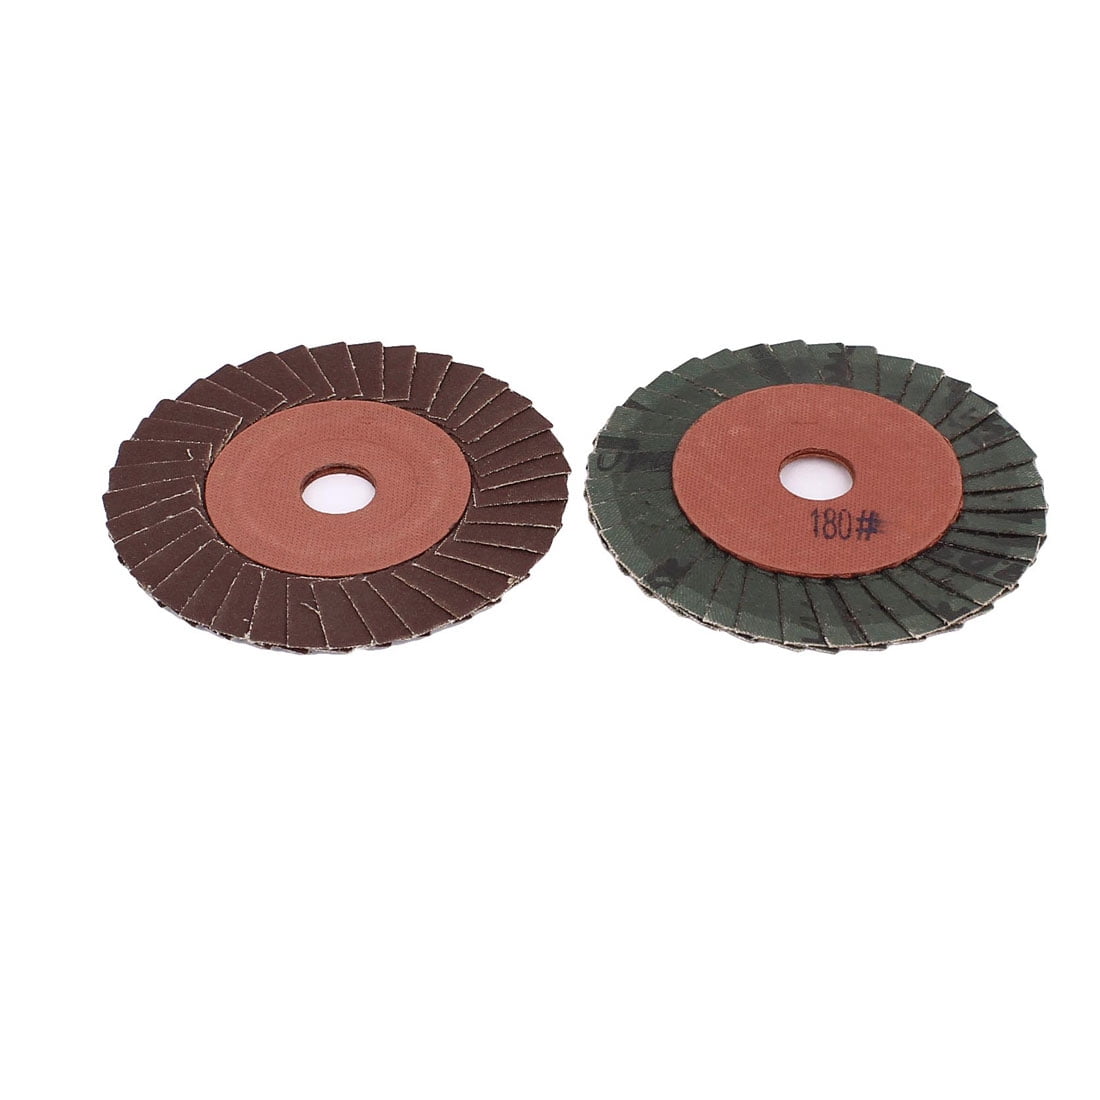 10x 40 Grit 4.5x7/8 4-1/2 Zirconia Flap Disc Sanding Wheels For Angle Grinder 